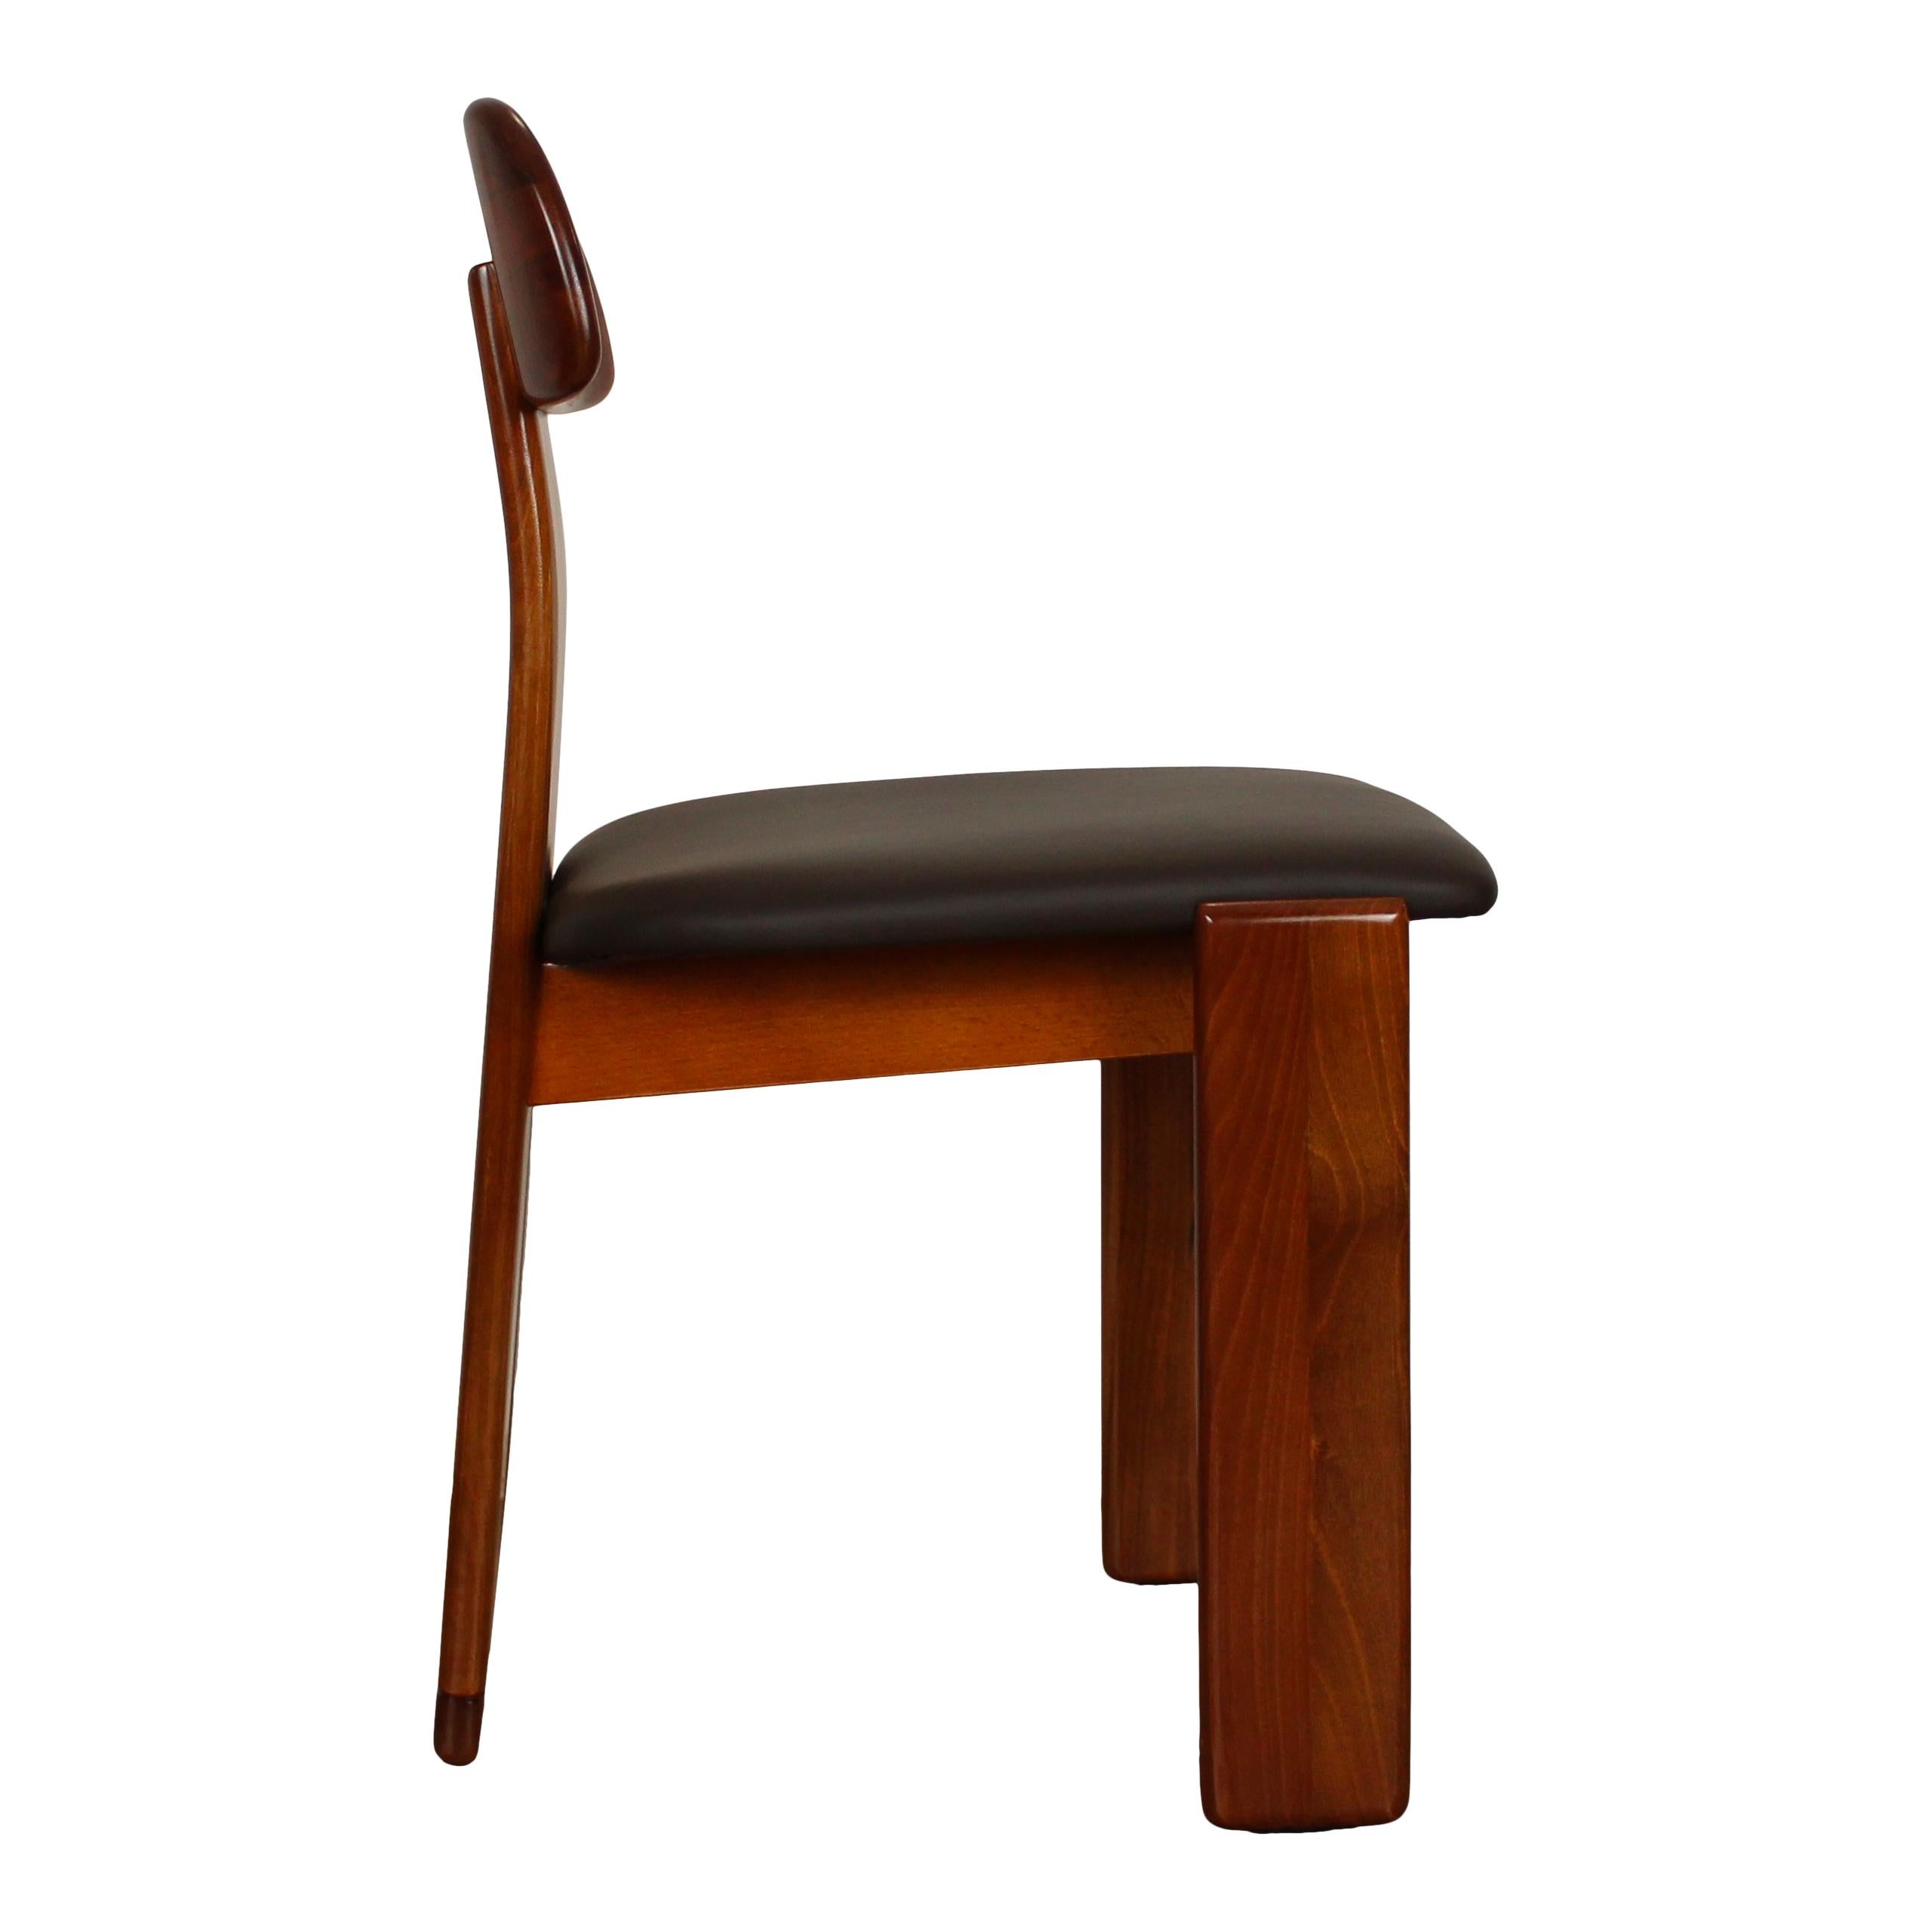 Mario Marenco Walnut Sapporo Dining Chairs for Mobilgirgi, 1970s, Set of 8 For Sale 6